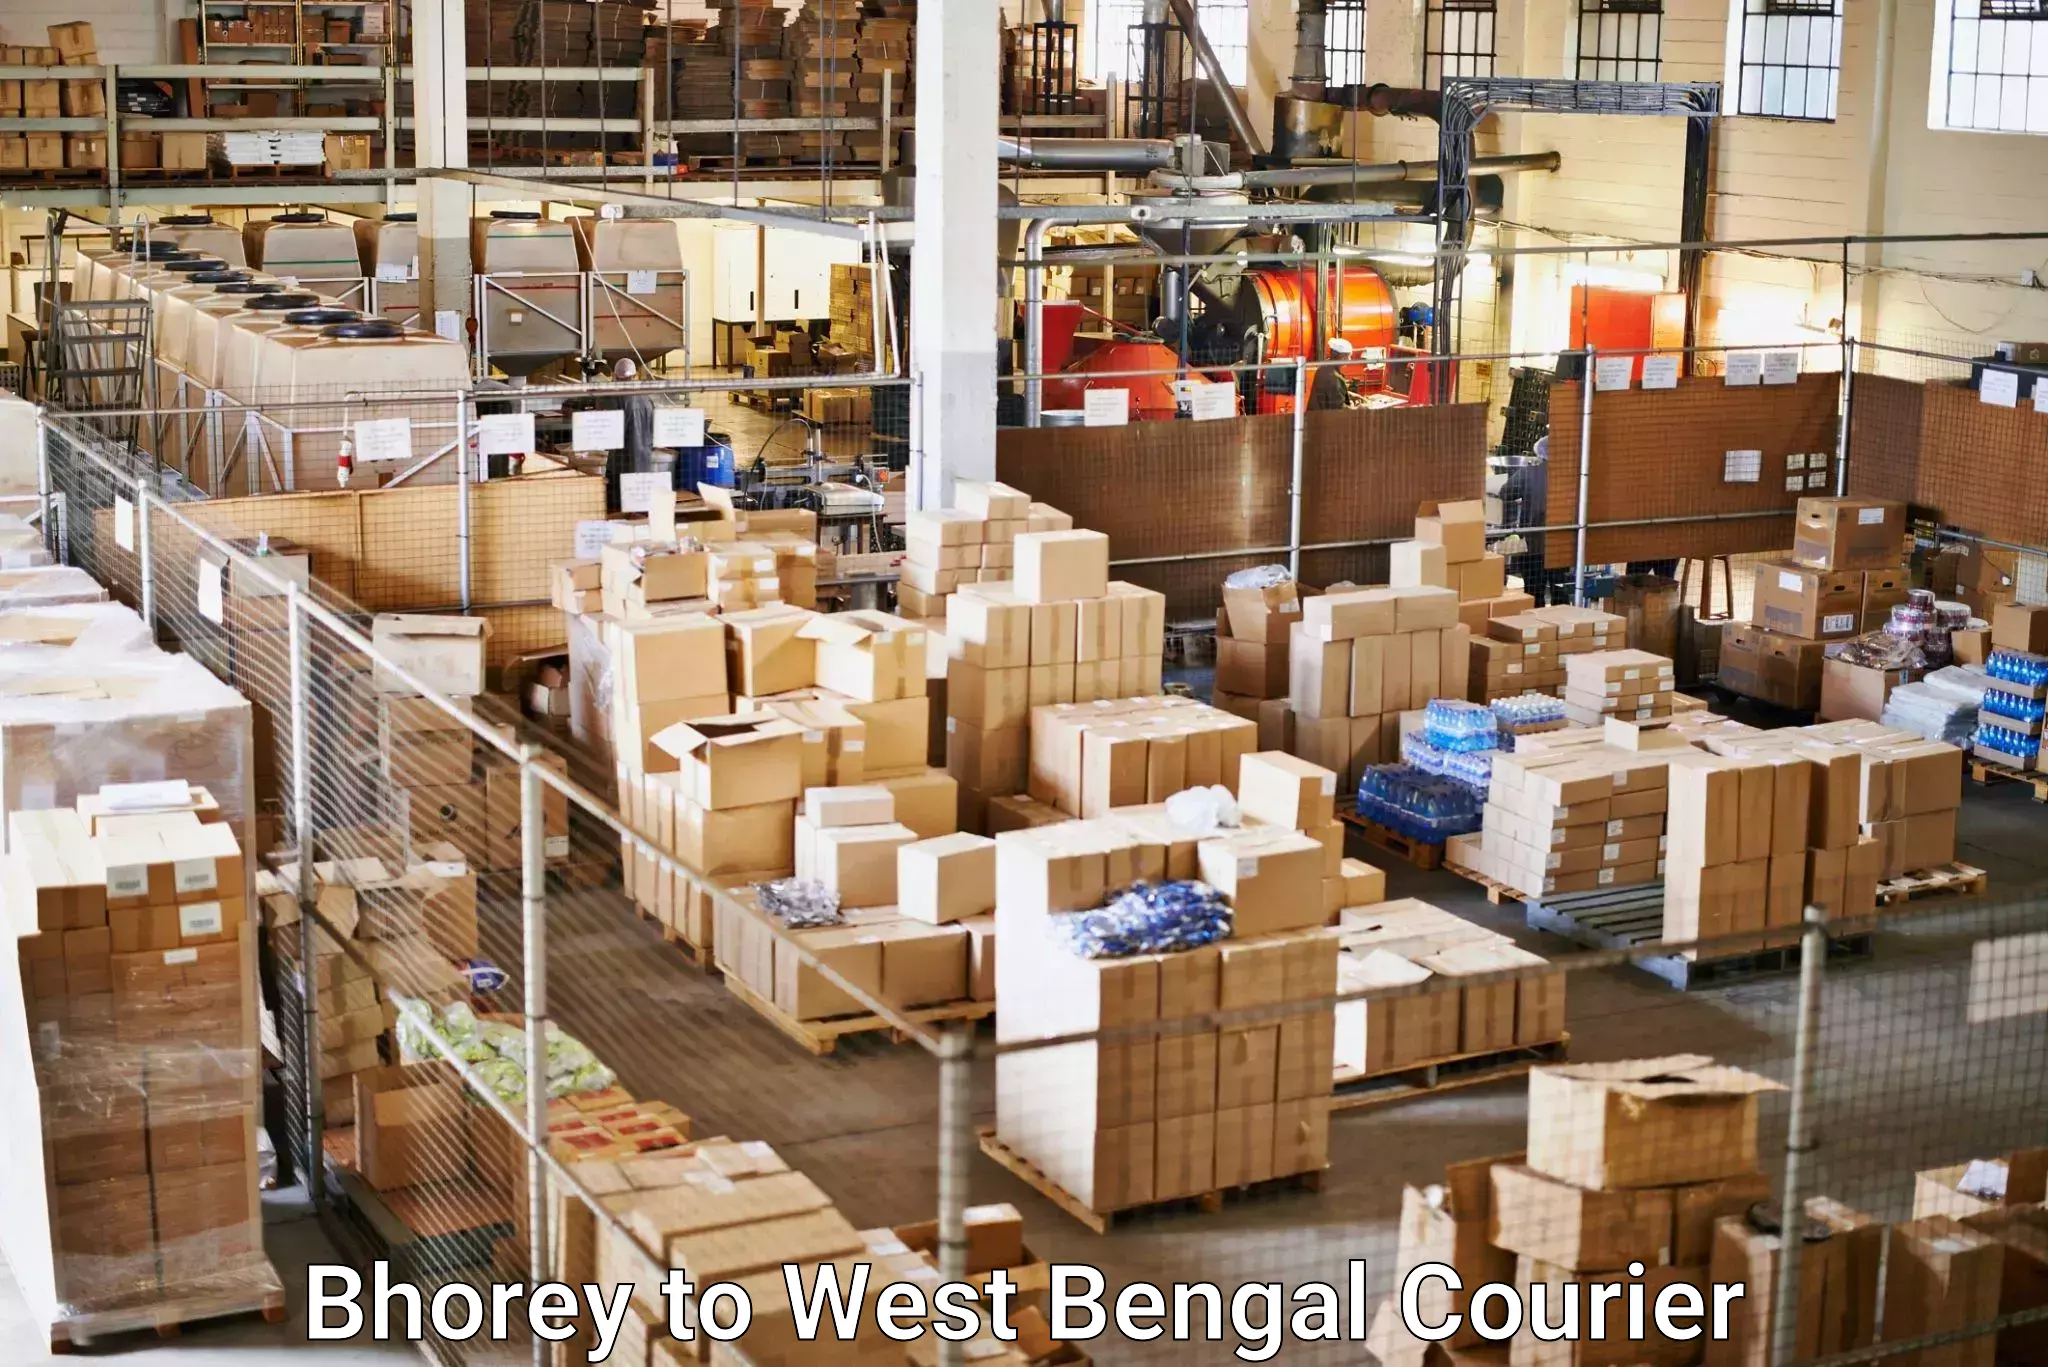 Seamless shipping experience Bhorey to West Bengal